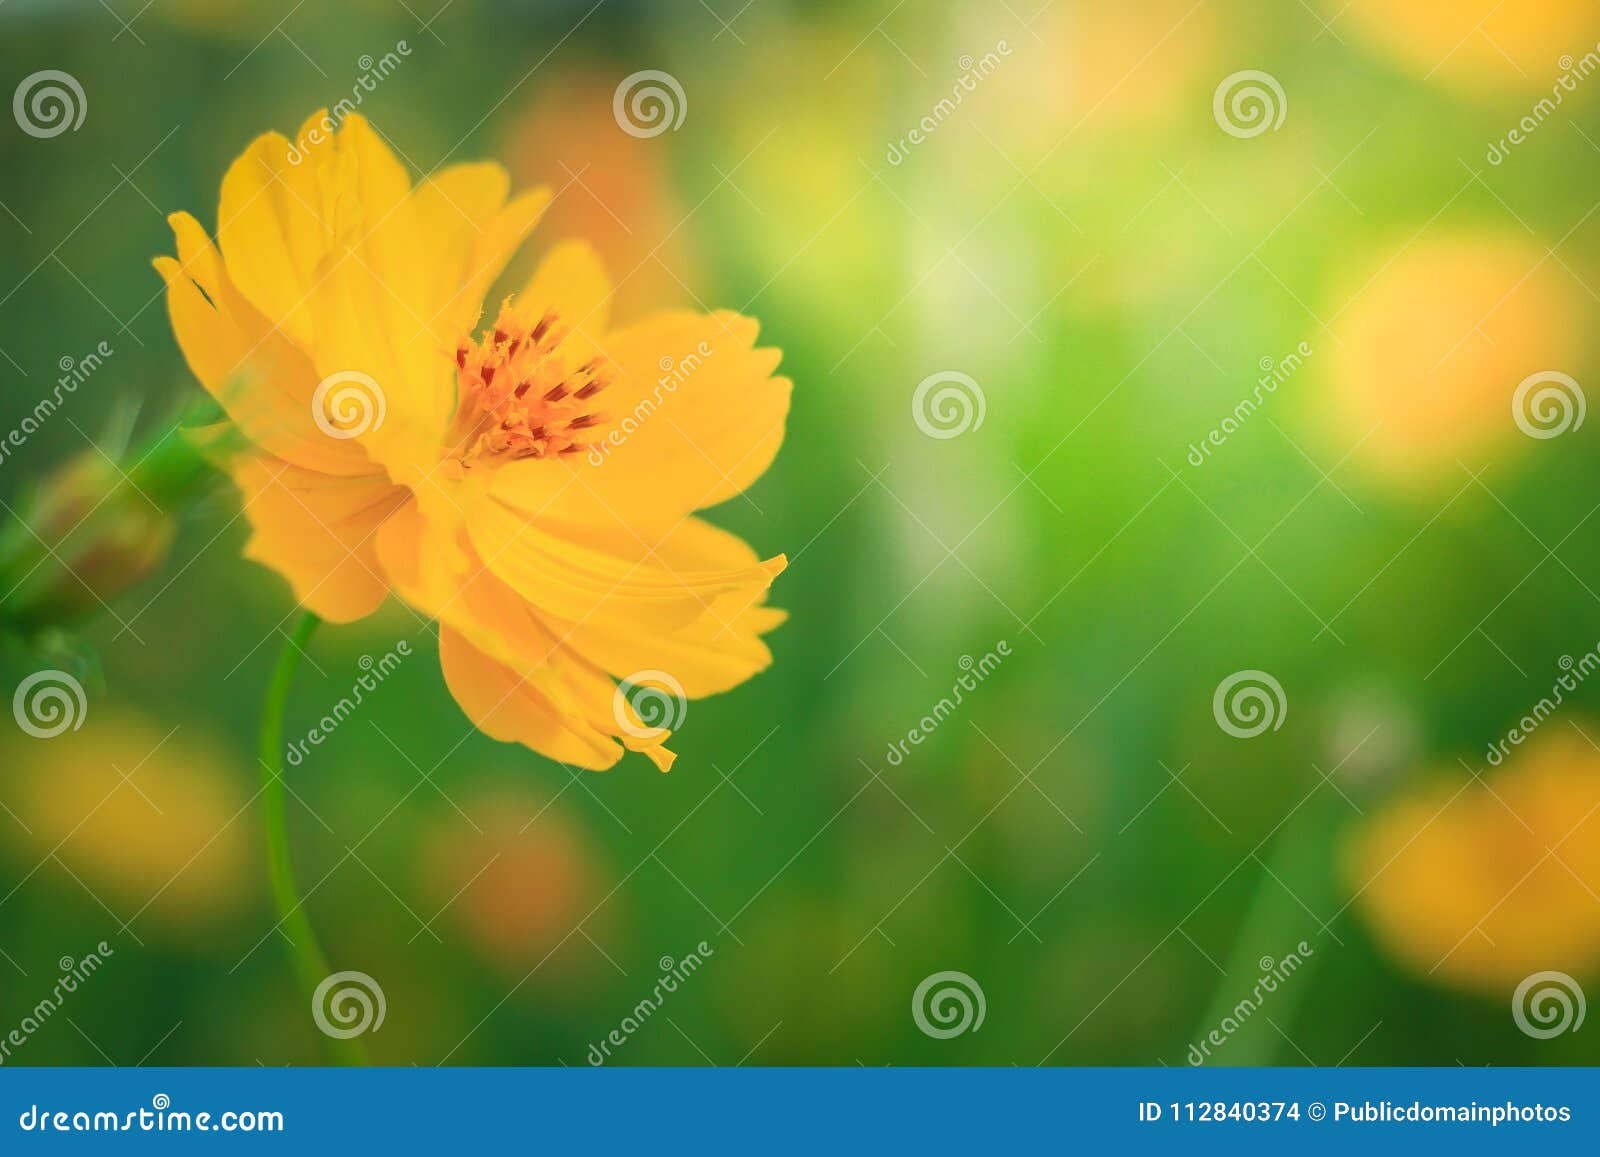 Download Flower Yellow Sulfur Cosmos Wildflower Picture Image 112840374 PSD Mockup Templates